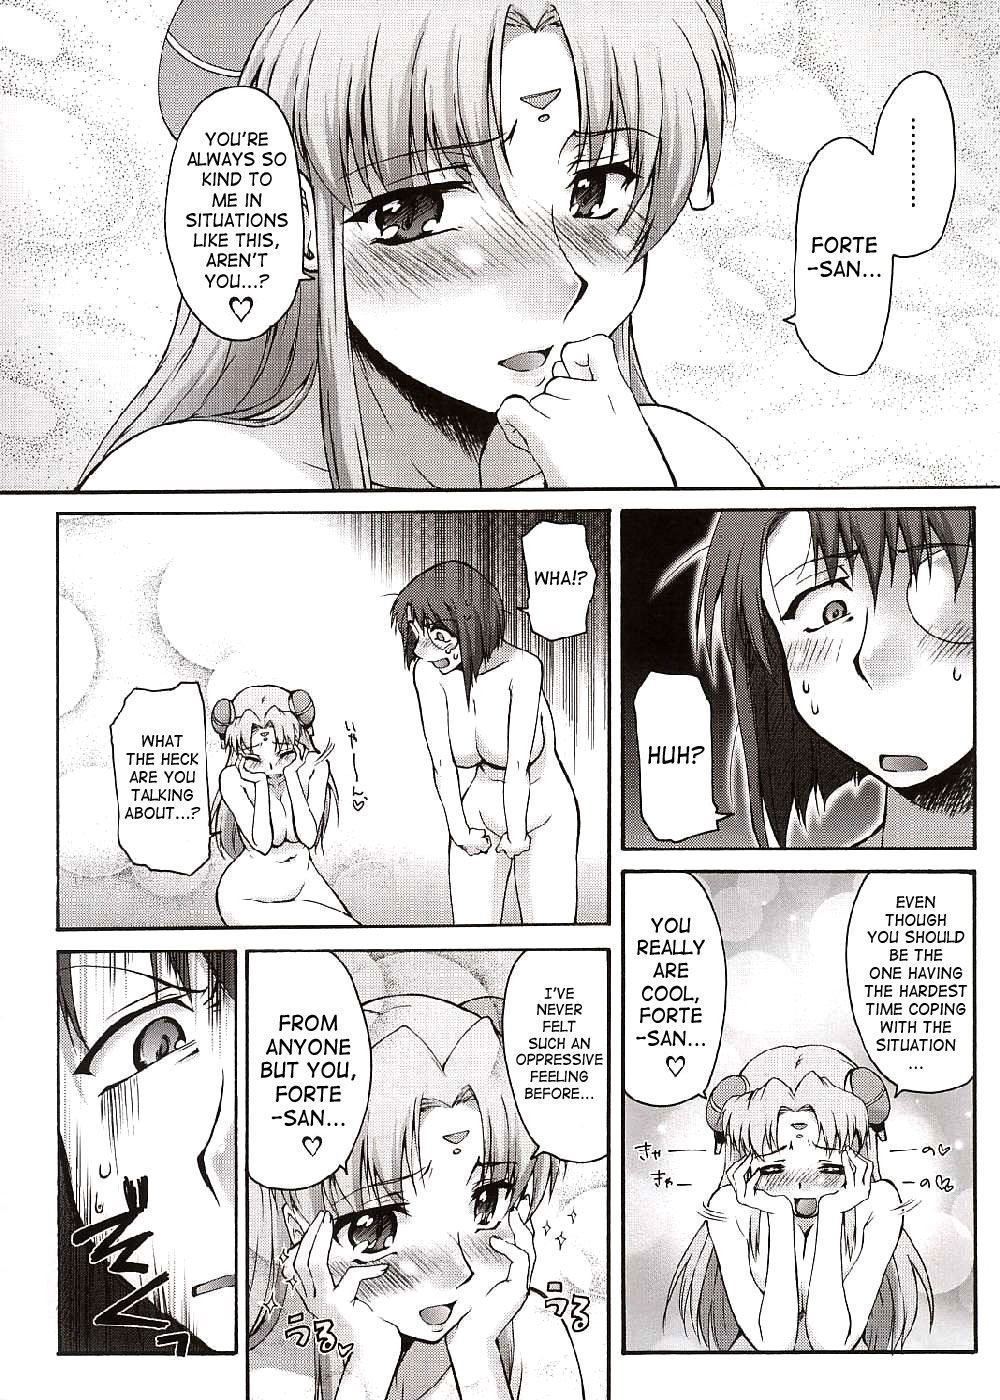 Nopelsex - Attention Please-Read-Hentai Manga Hentai Comic - Page: 29 - Online porn  video at mobile